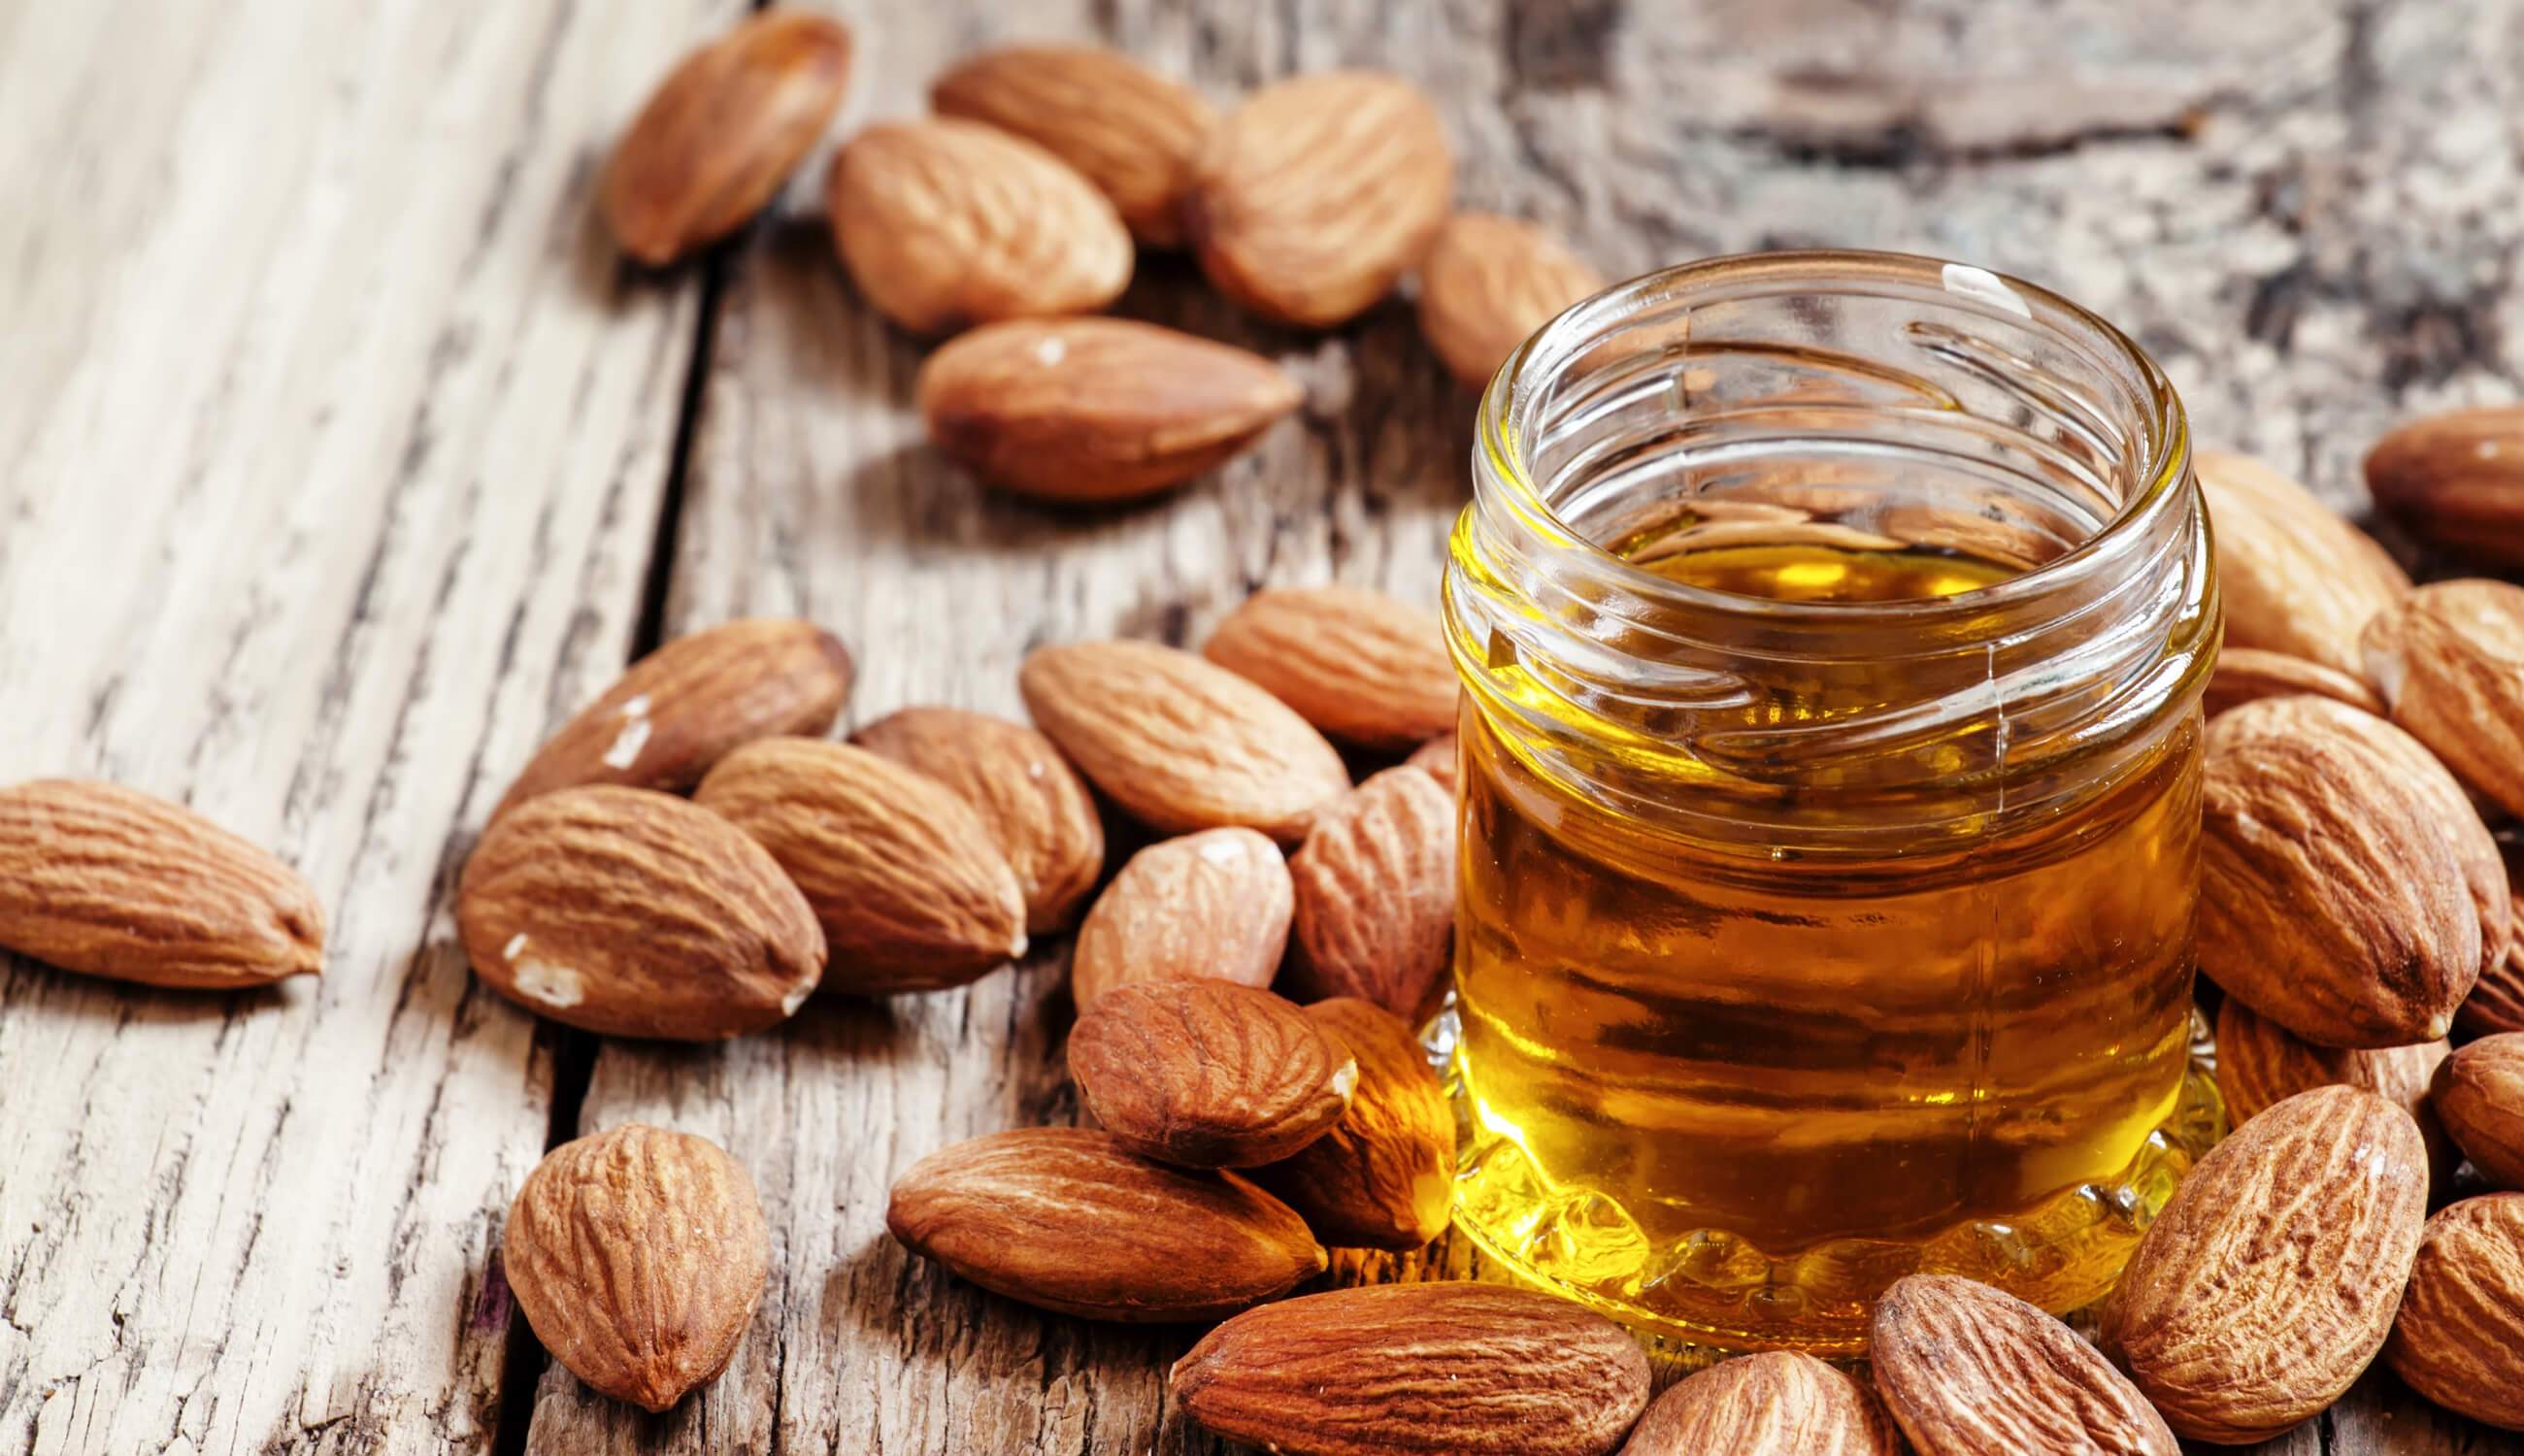 Almond Oil Market Size to rise at 4.8% of CAGR in next 5 years